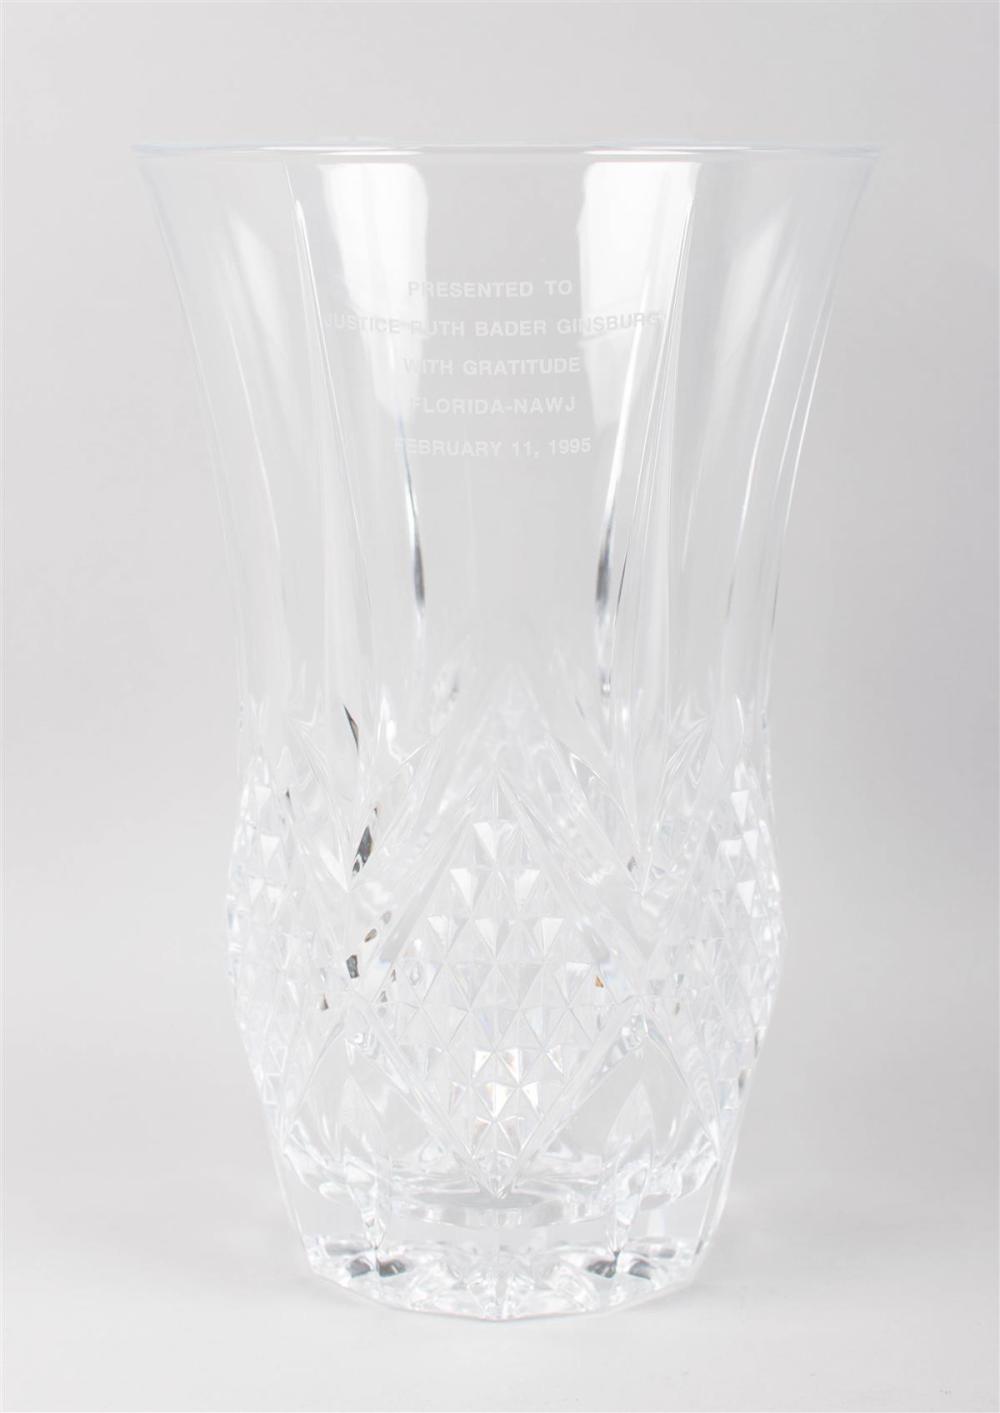 GLASS VASE PRESENTED TO JUSTICE 33c3d5